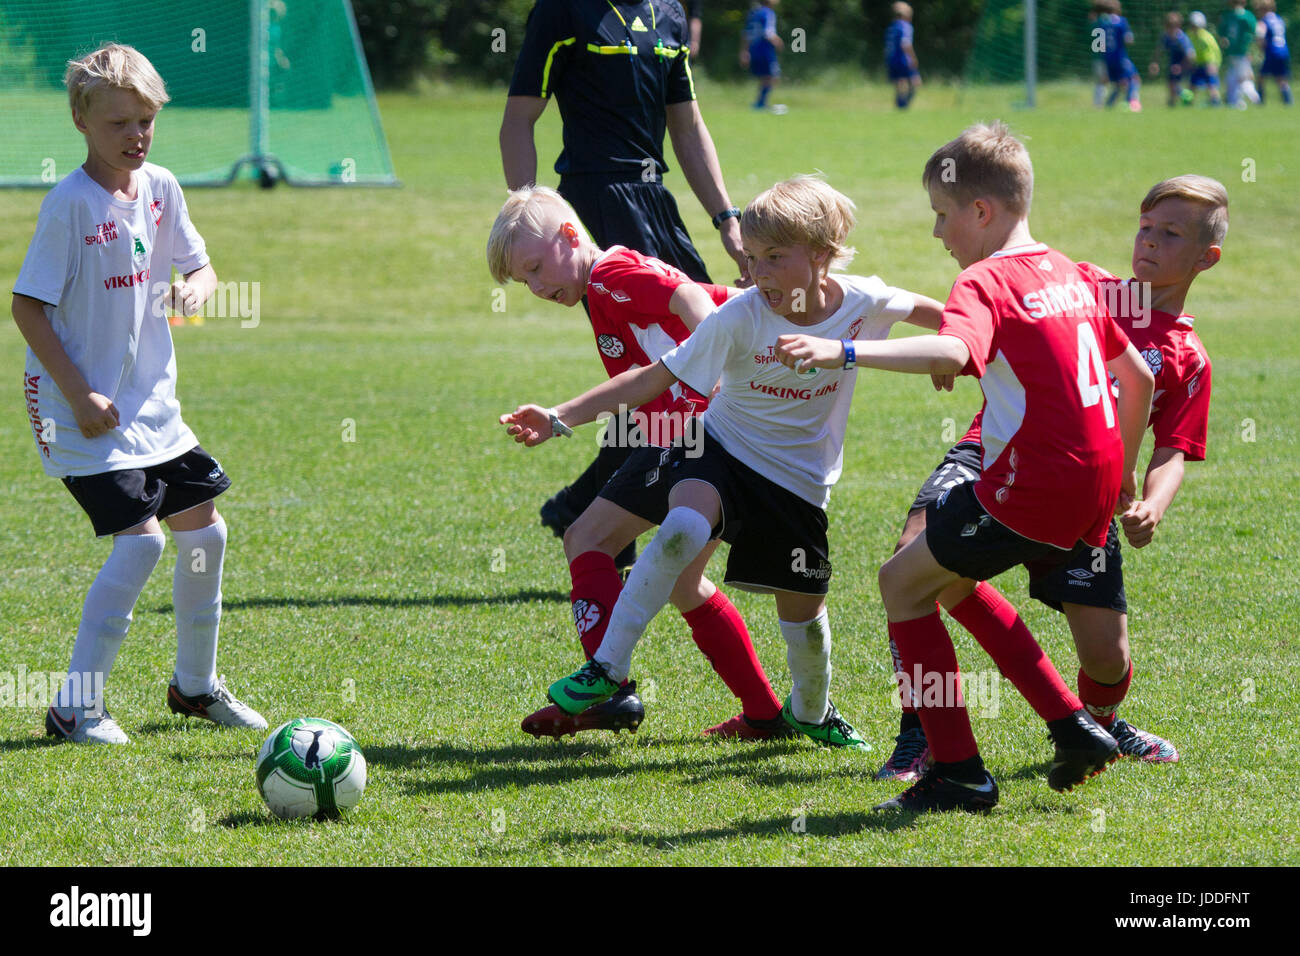 Mariehamn, Åland Islands, Finland, 19 June 2017.  Group games on day two of the Alandia Cup at Baltichallen in Mariehamn, Åland, Finland on 19 June 2017. Over 1500 players from more than 100 youth teams from across Sweden and Finland take part in the popular yearly summer football tournament in the Finnish archipelago. Pictured: EPS Akatemia Punainen (red) beat JIK/IFFK (White) 9-0 in the group stages. Picture: Rob Watkins/Alamy News Stock Photo